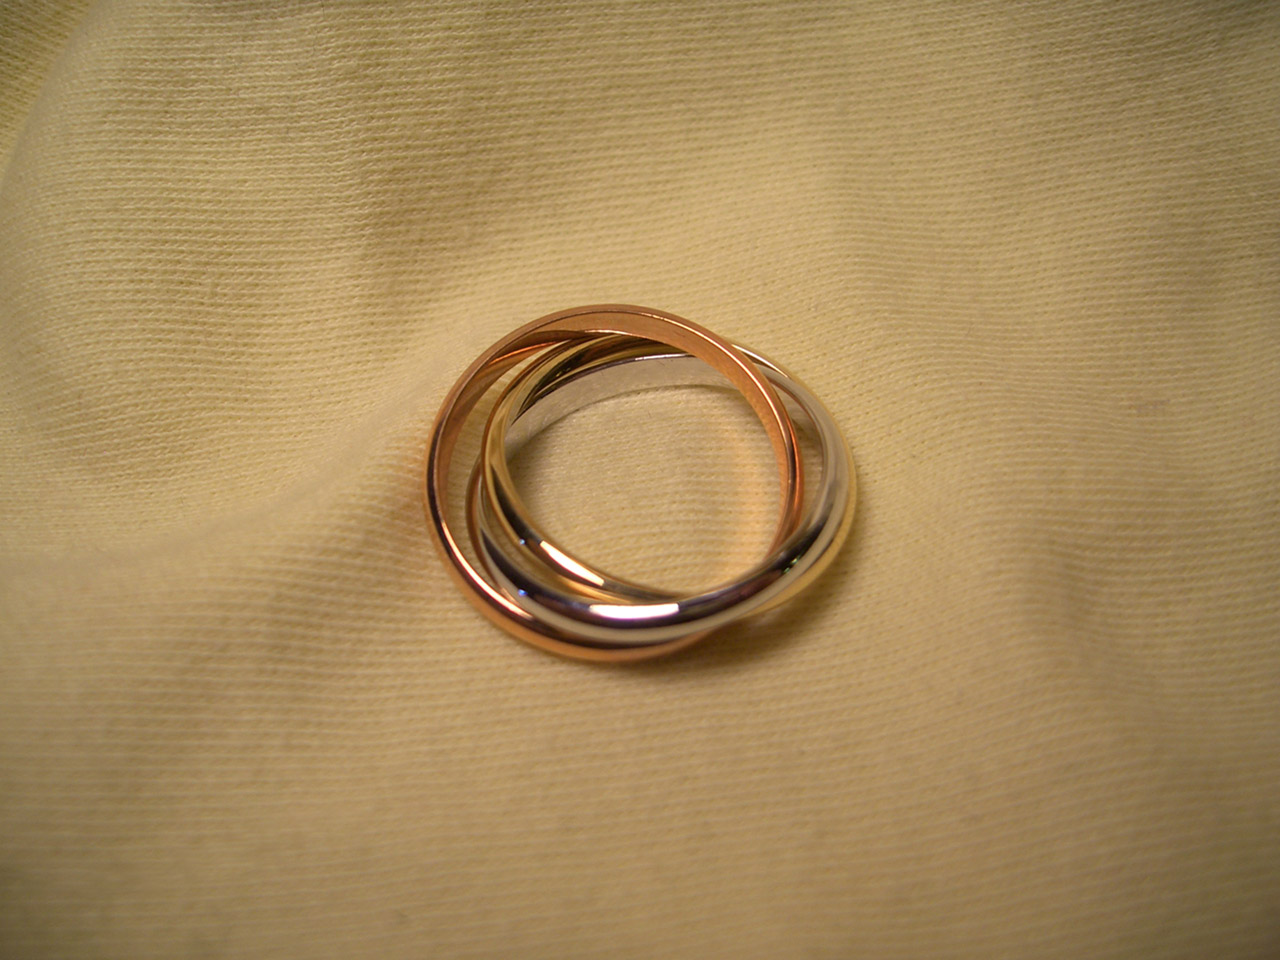 Ring in Silver, Gold and Bronze Color on Background